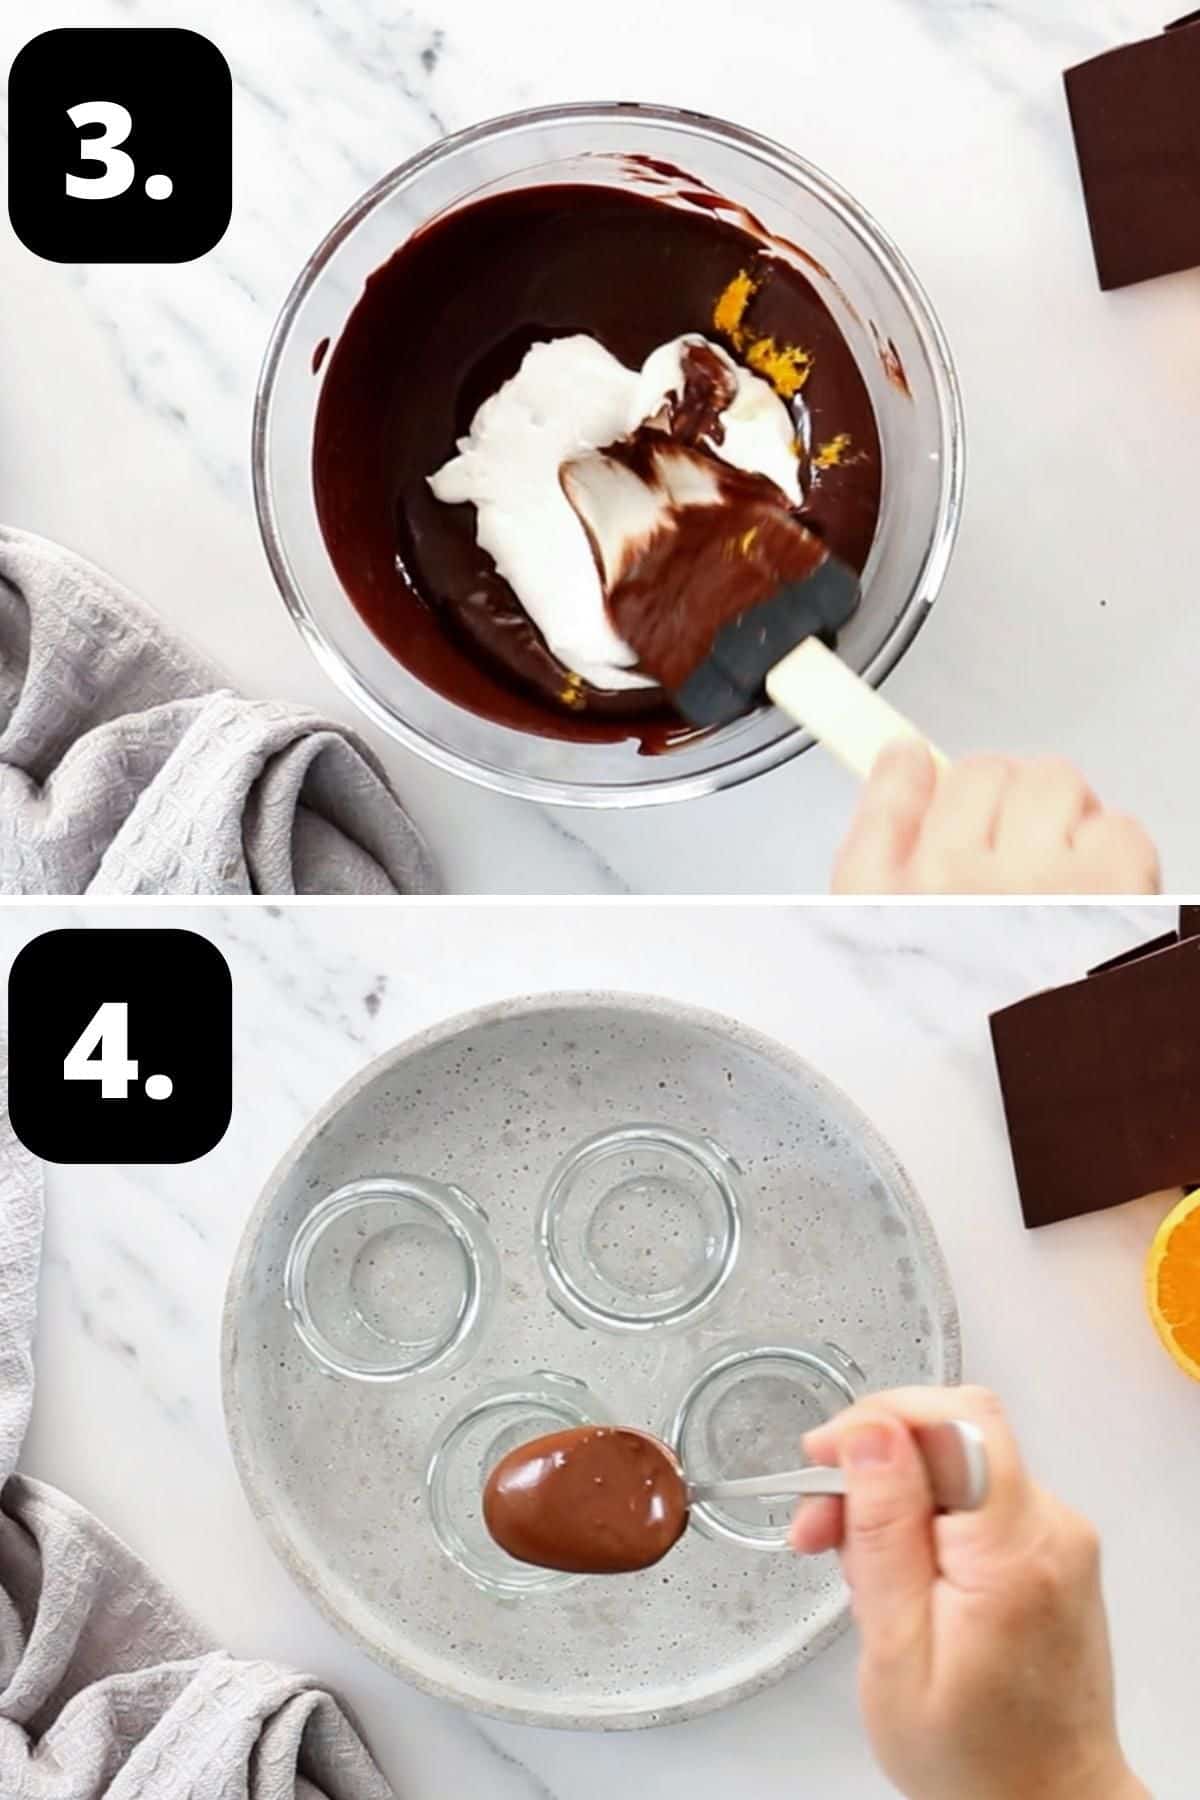 Steps 3-4 of preparing this recipe - adding the yoghurt and orange to the chocolate mix and spooning into jars.